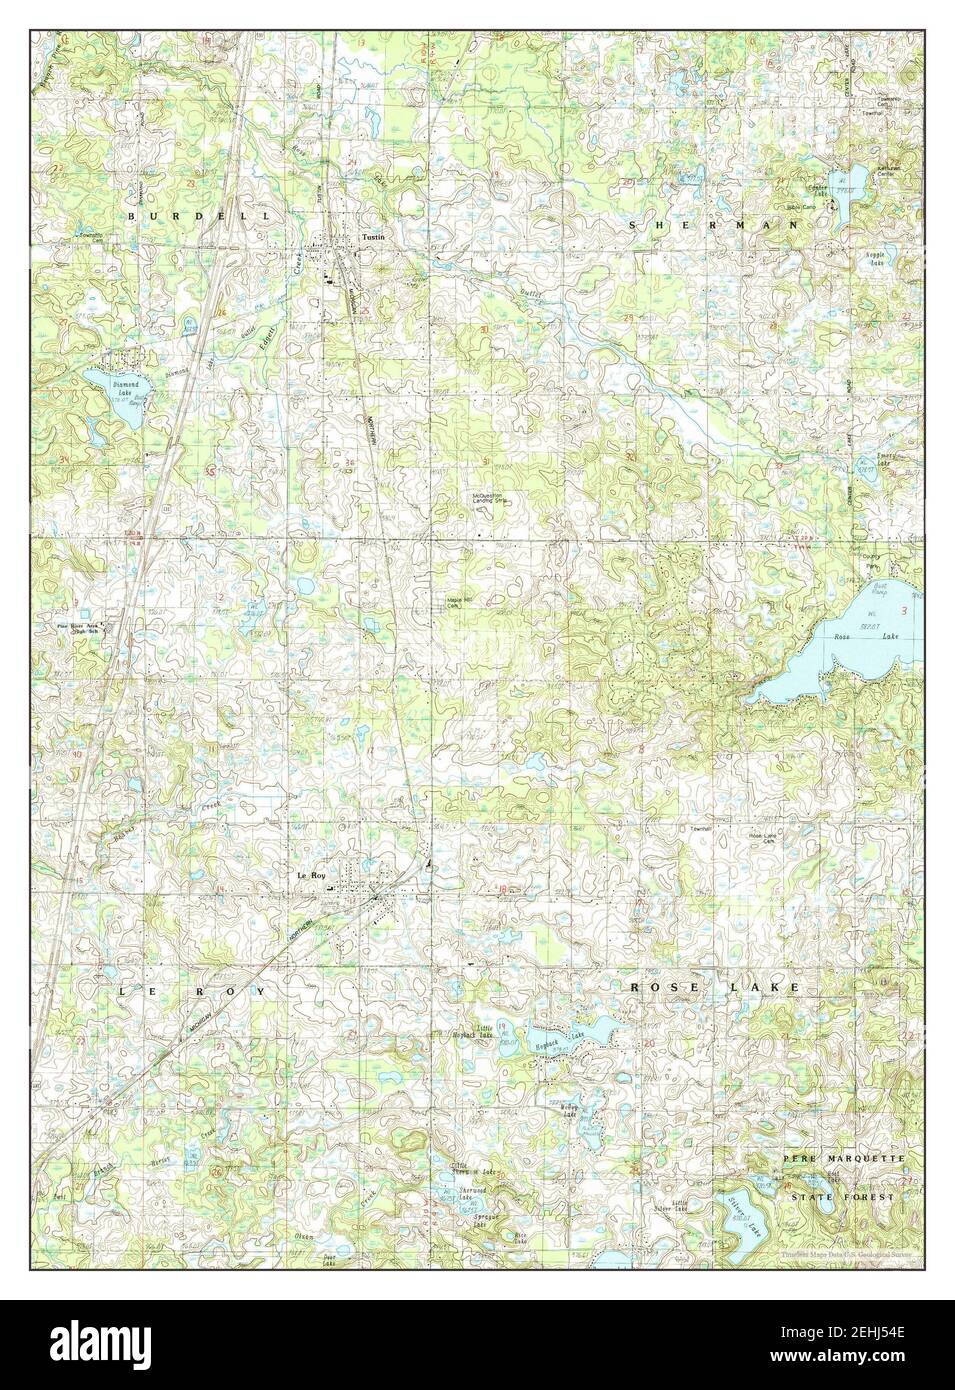 Le Roy, Michigan, map 1983, 1:25000, United States of America by Timeless Maps, data U.S. Geological Survey Stock Photo